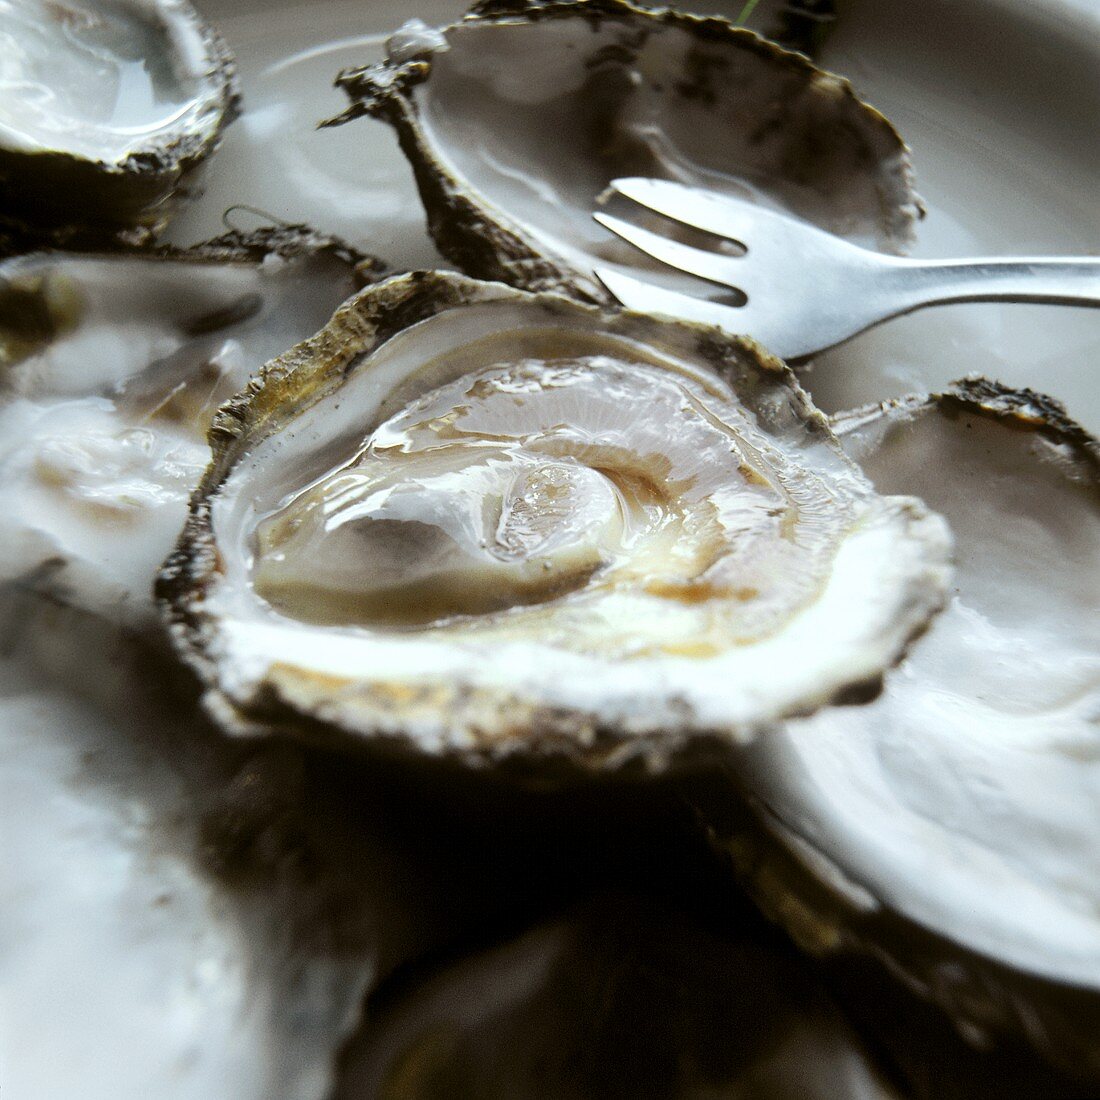 Several opened oysters, with a fork beside them